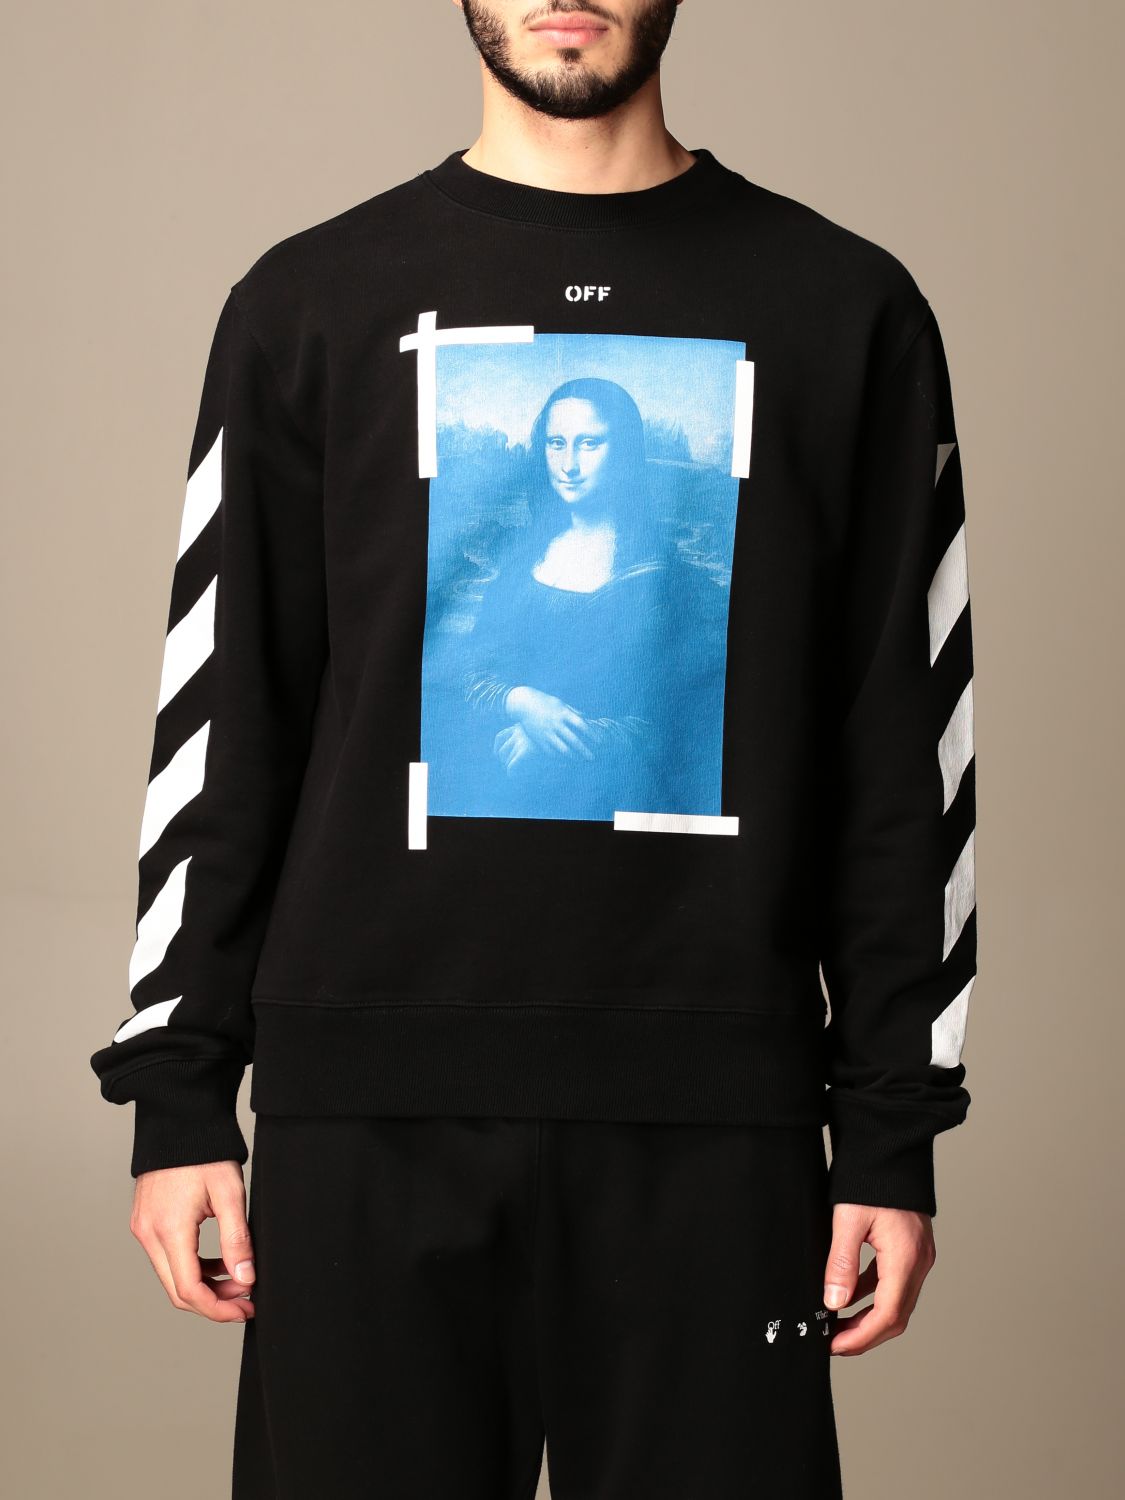 Off - cotton OFF-WHITE: Black Off-White sweatshirt in online with sweatshirt crewneck White at print | OMBA025R21FLE003